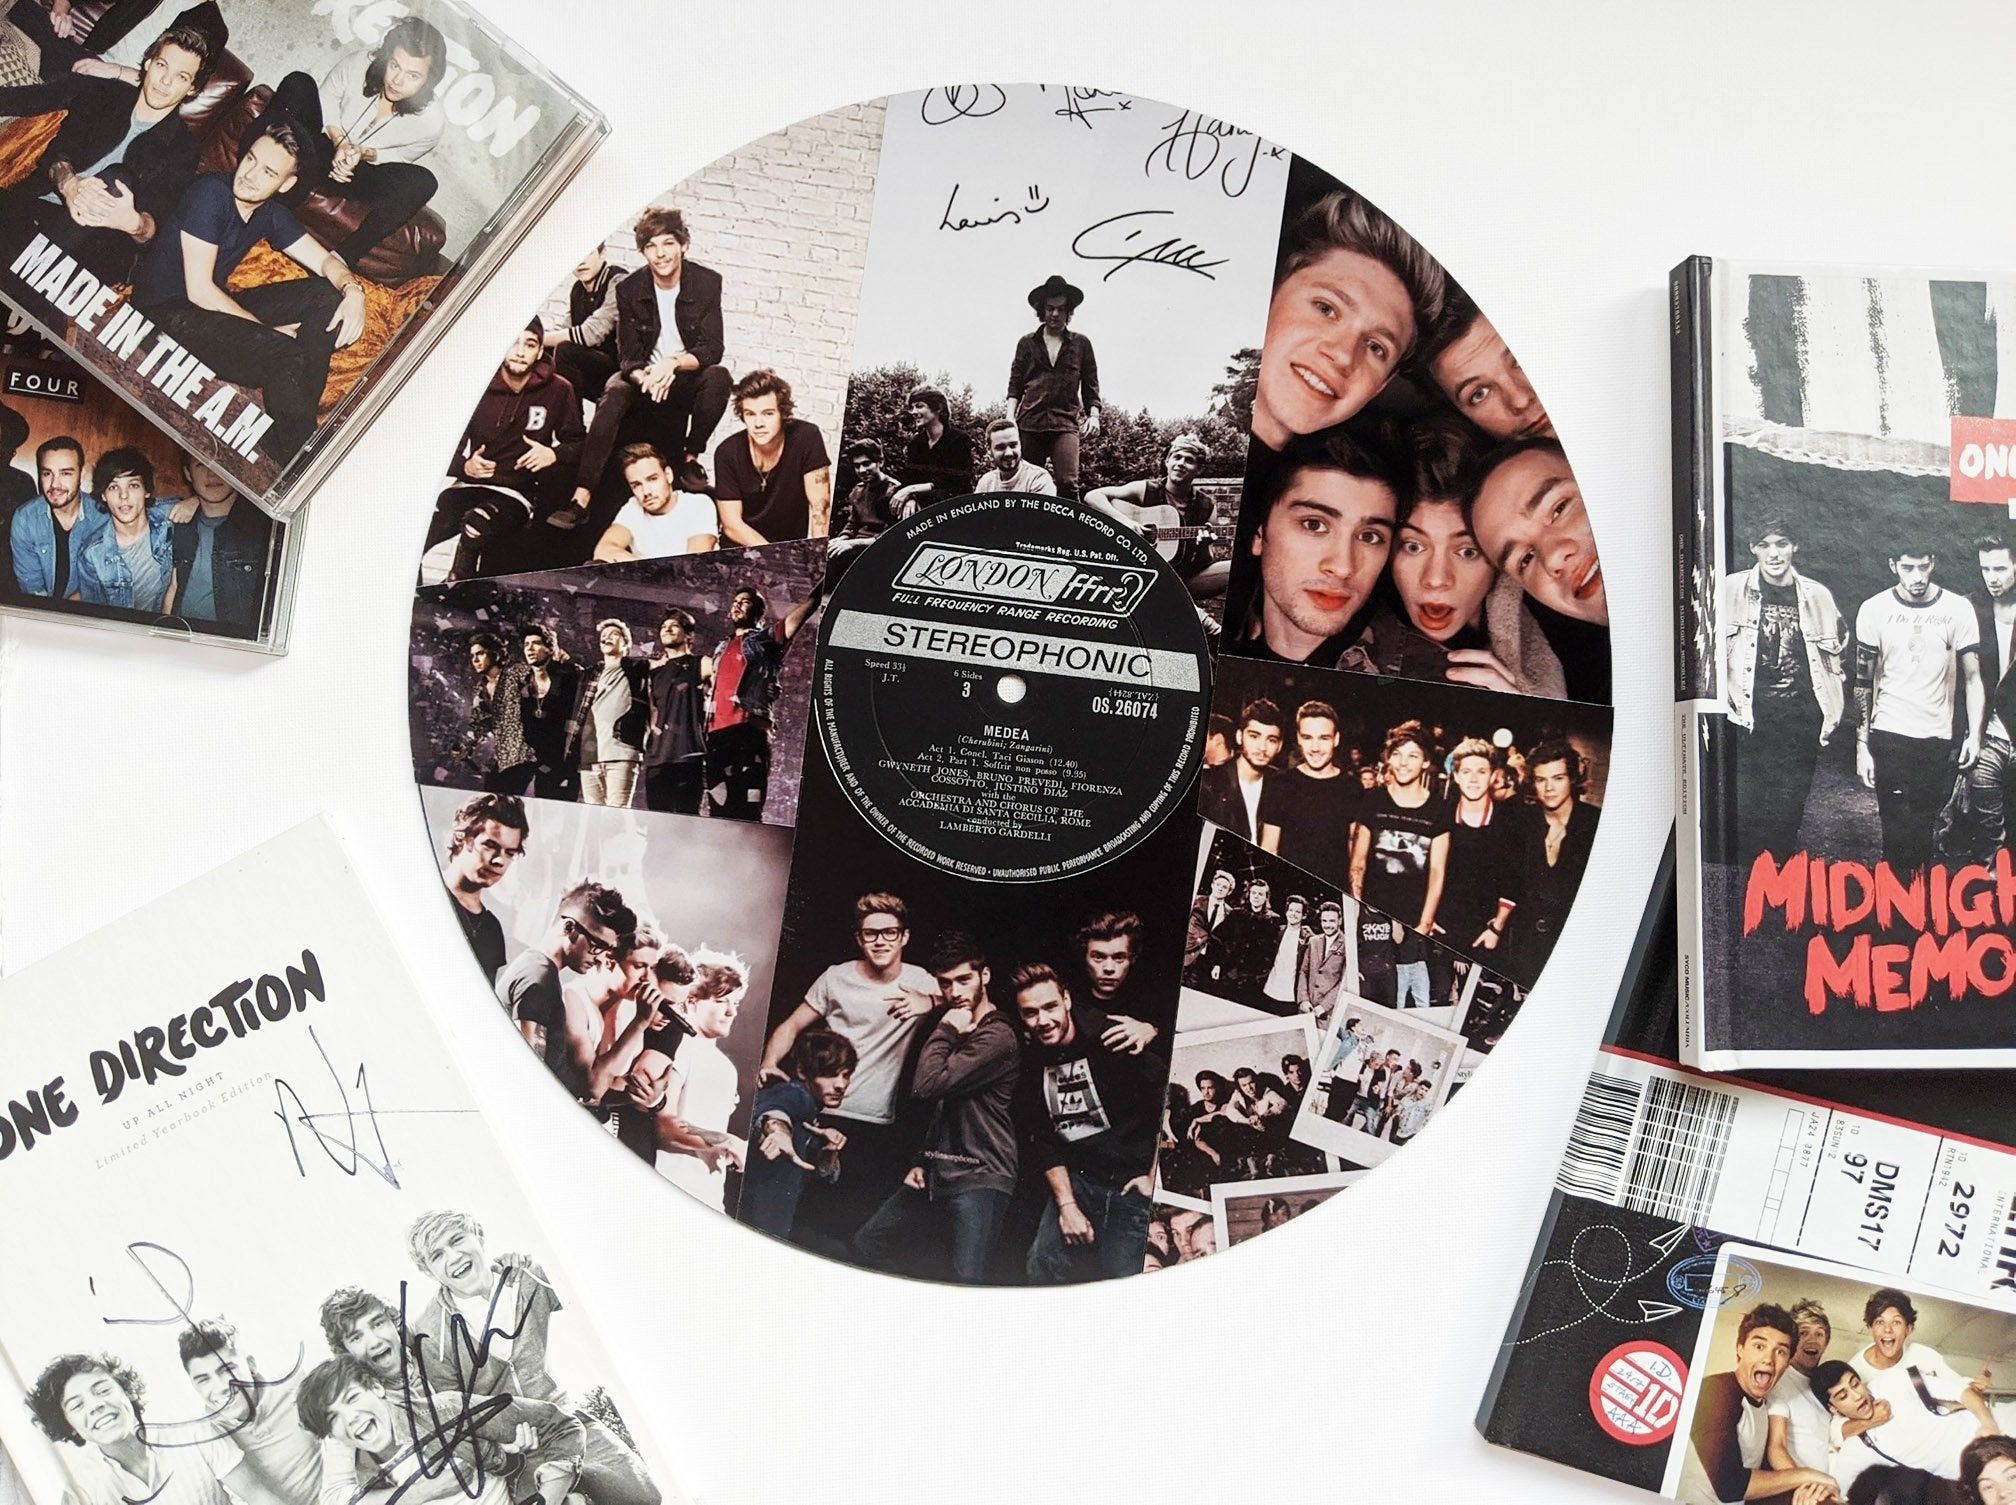 A collage of One Direction images on a vinyl record - One Direction